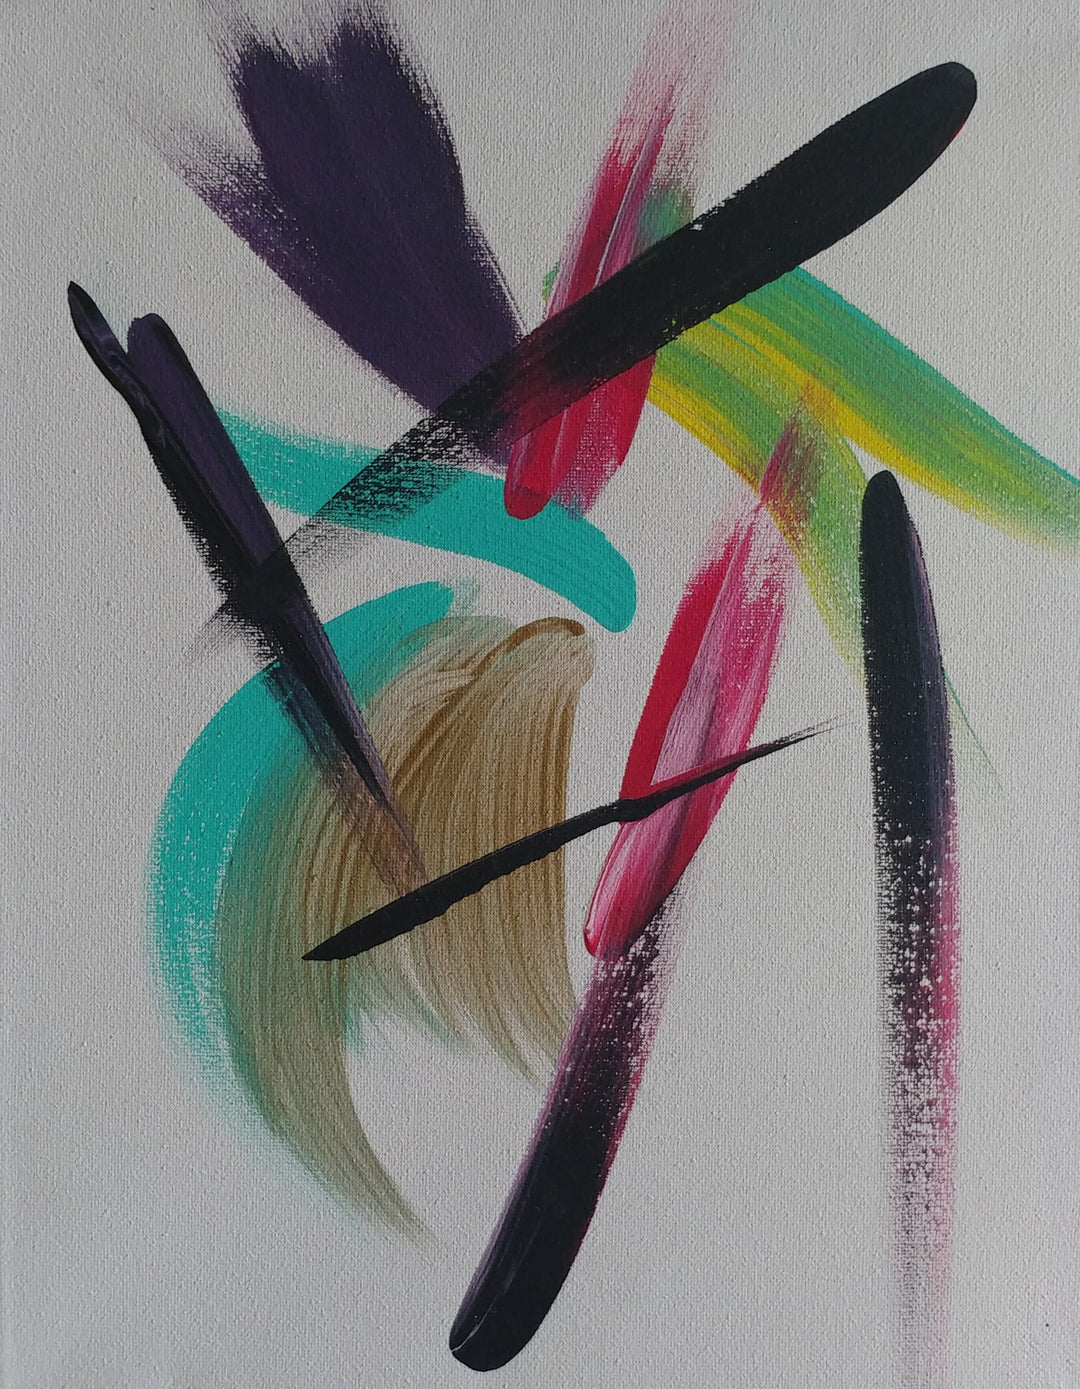 bold strokes of black, teal, gold, purple, red, green and yellow on white canvas.